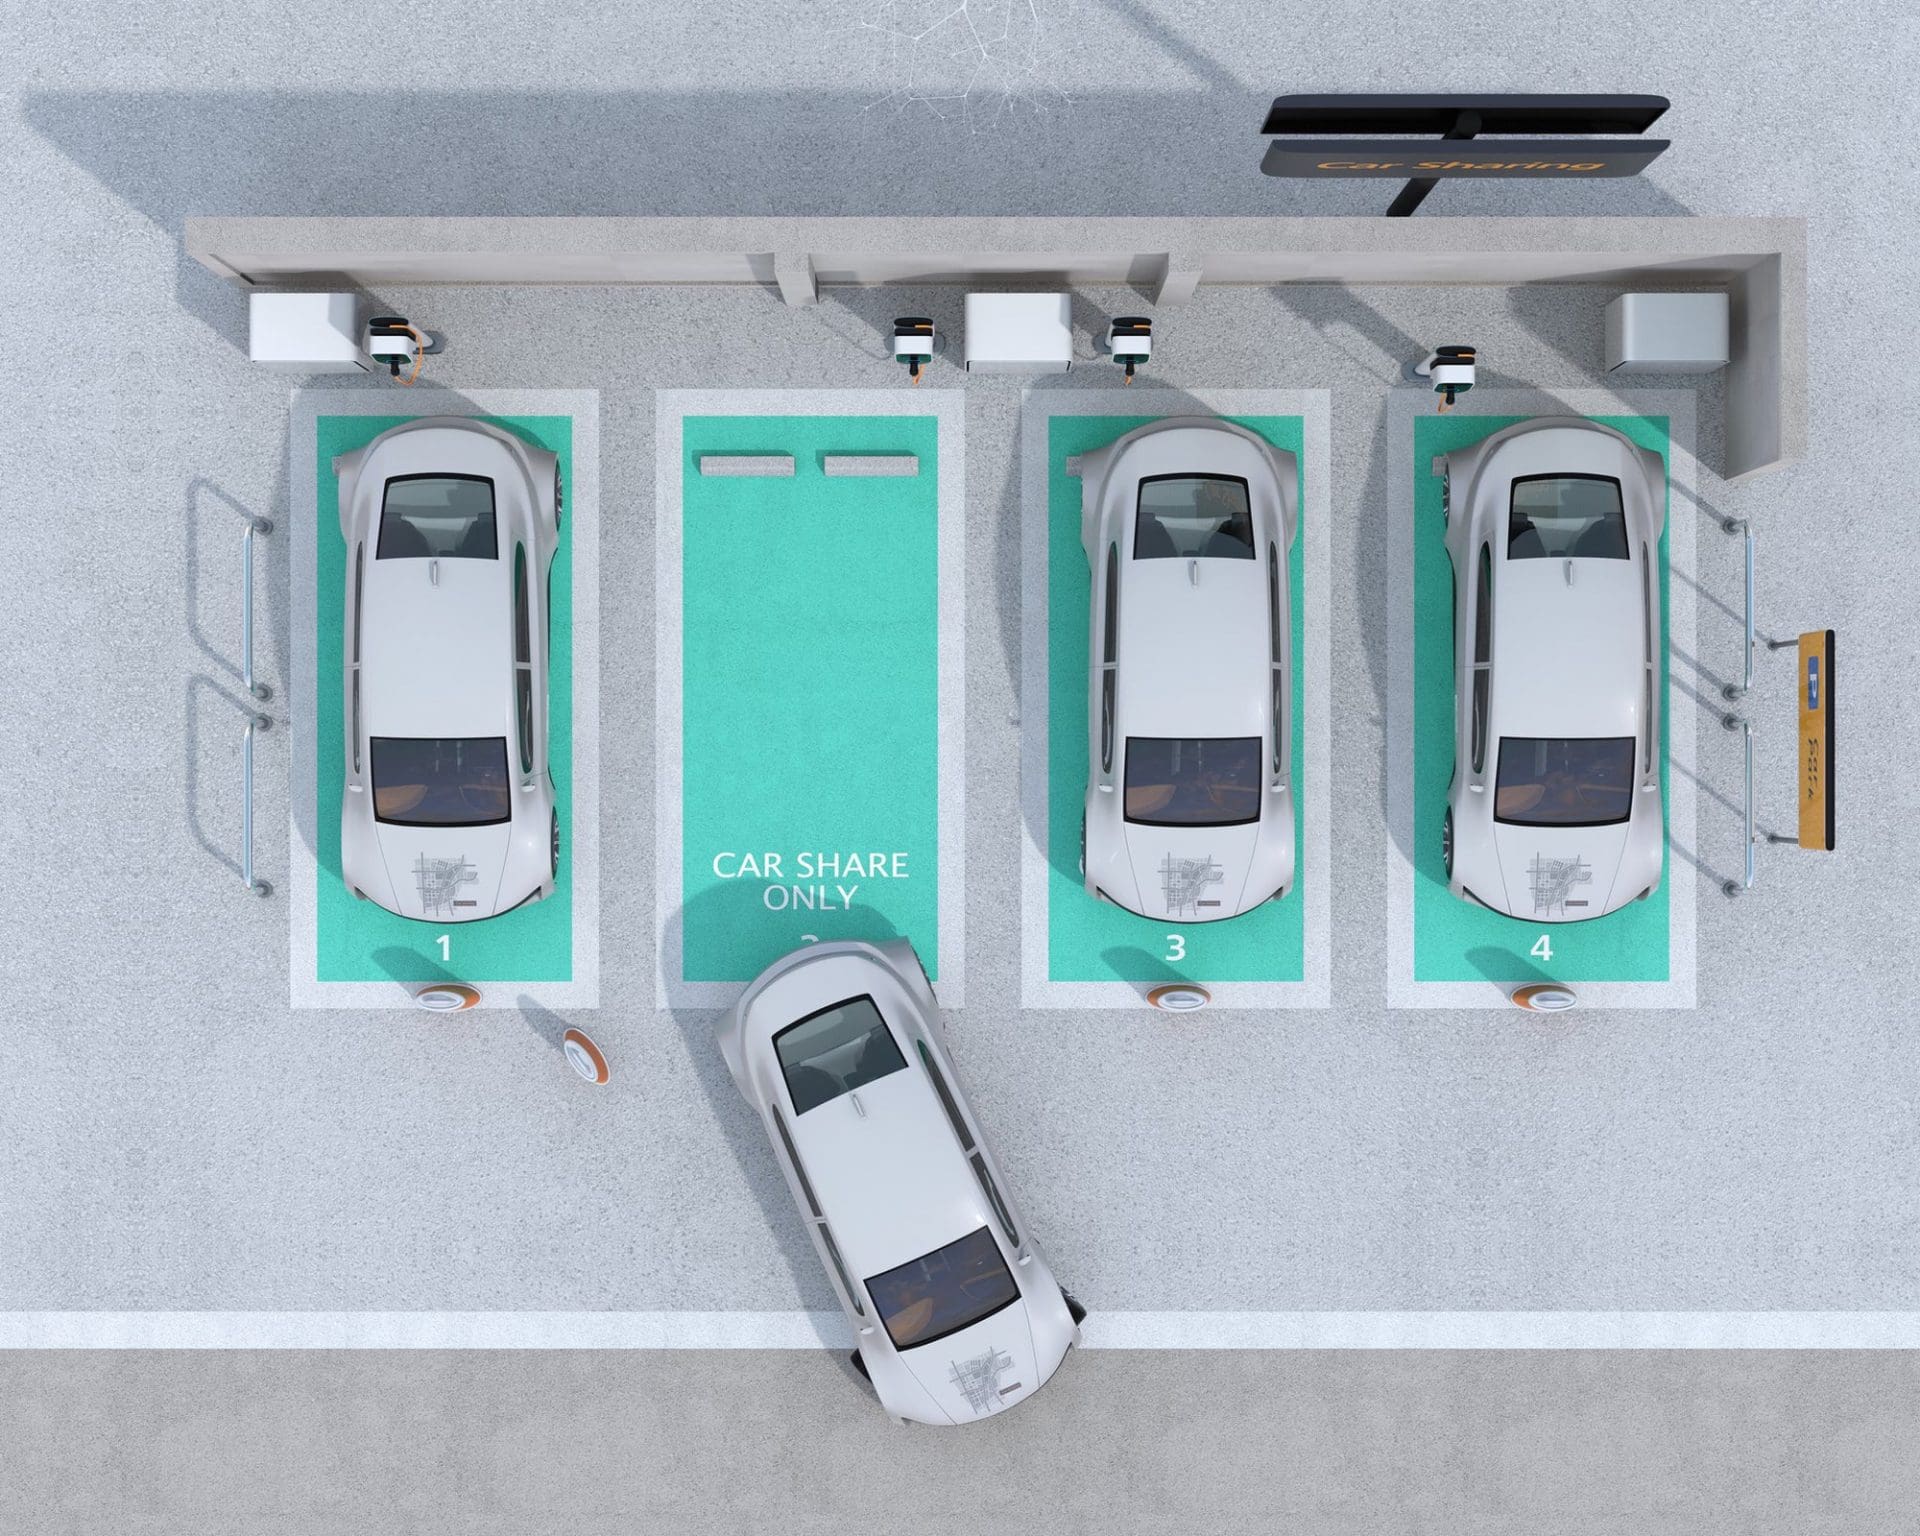 pg-e-rolls-out-electric-vehicle-fast-charge-stations-citybiz